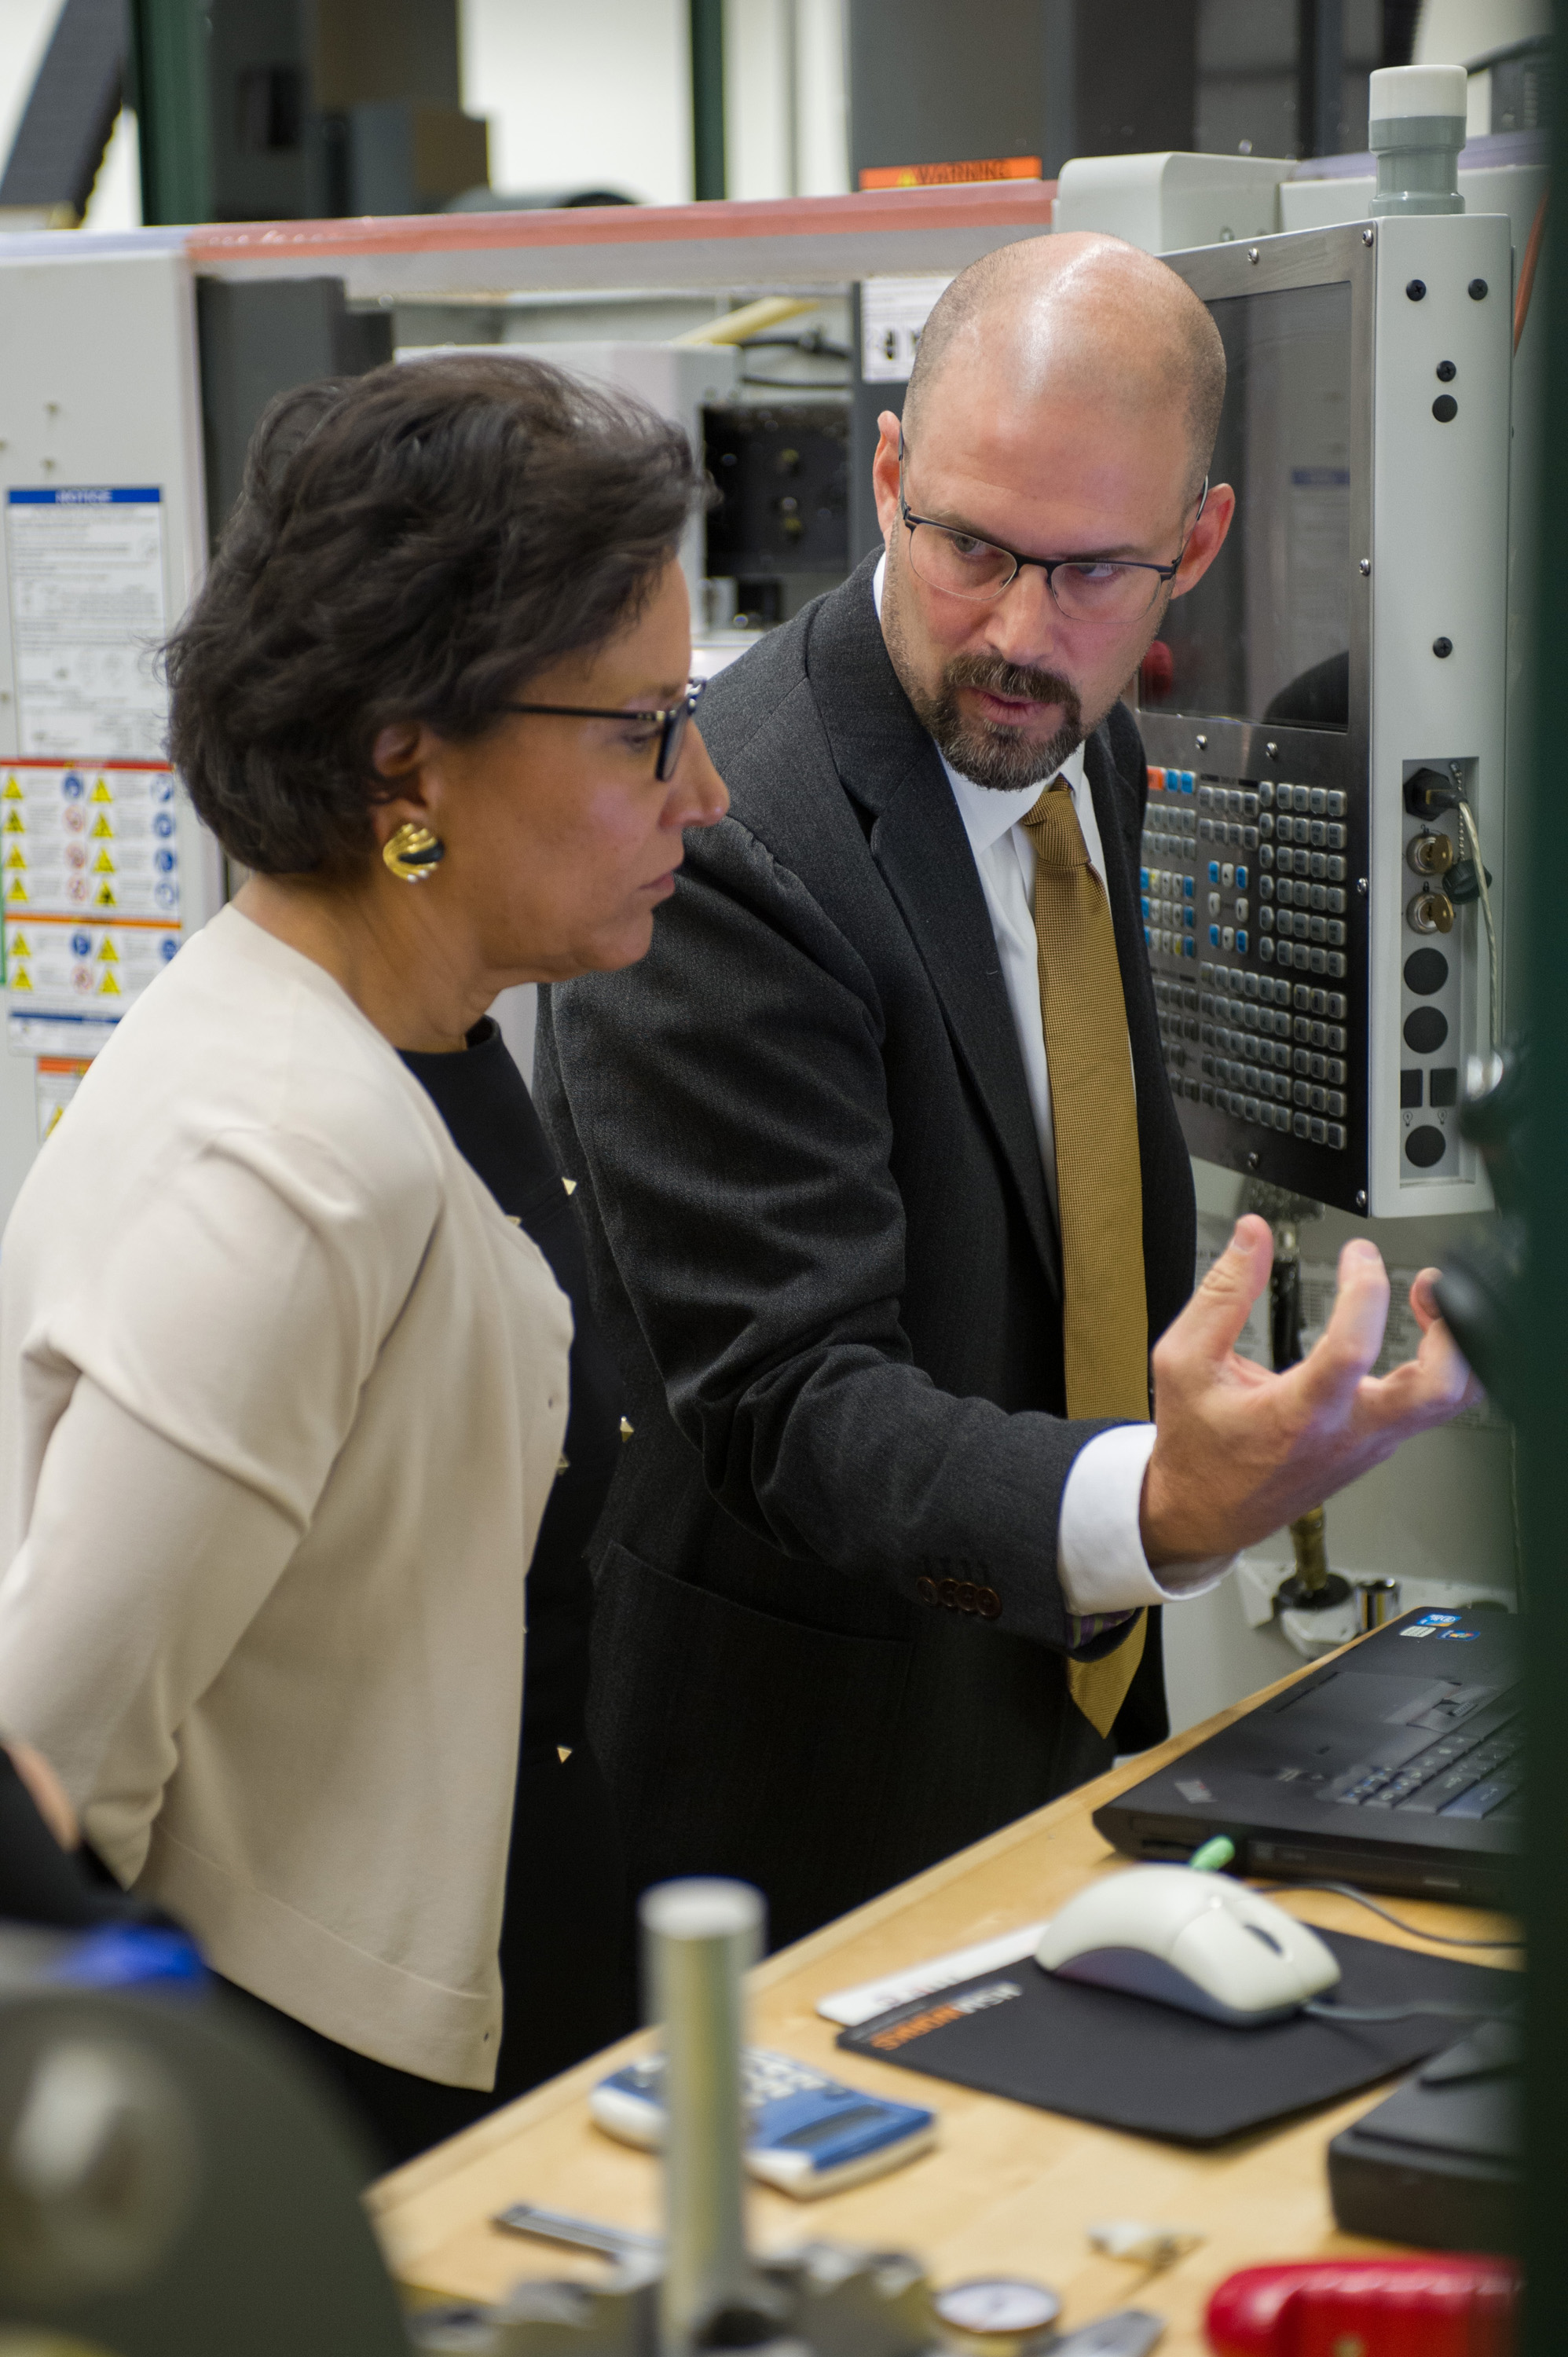 Mark McJunkin, director of operations at the Global Center for Medical Innovation (GCMI), explains a prototyping step to U.S. Secretary of Commerce Penny Pritzker. Pritzker visited GCMI on August 23rd. (Georgia Tech Photo: Rob Felt)